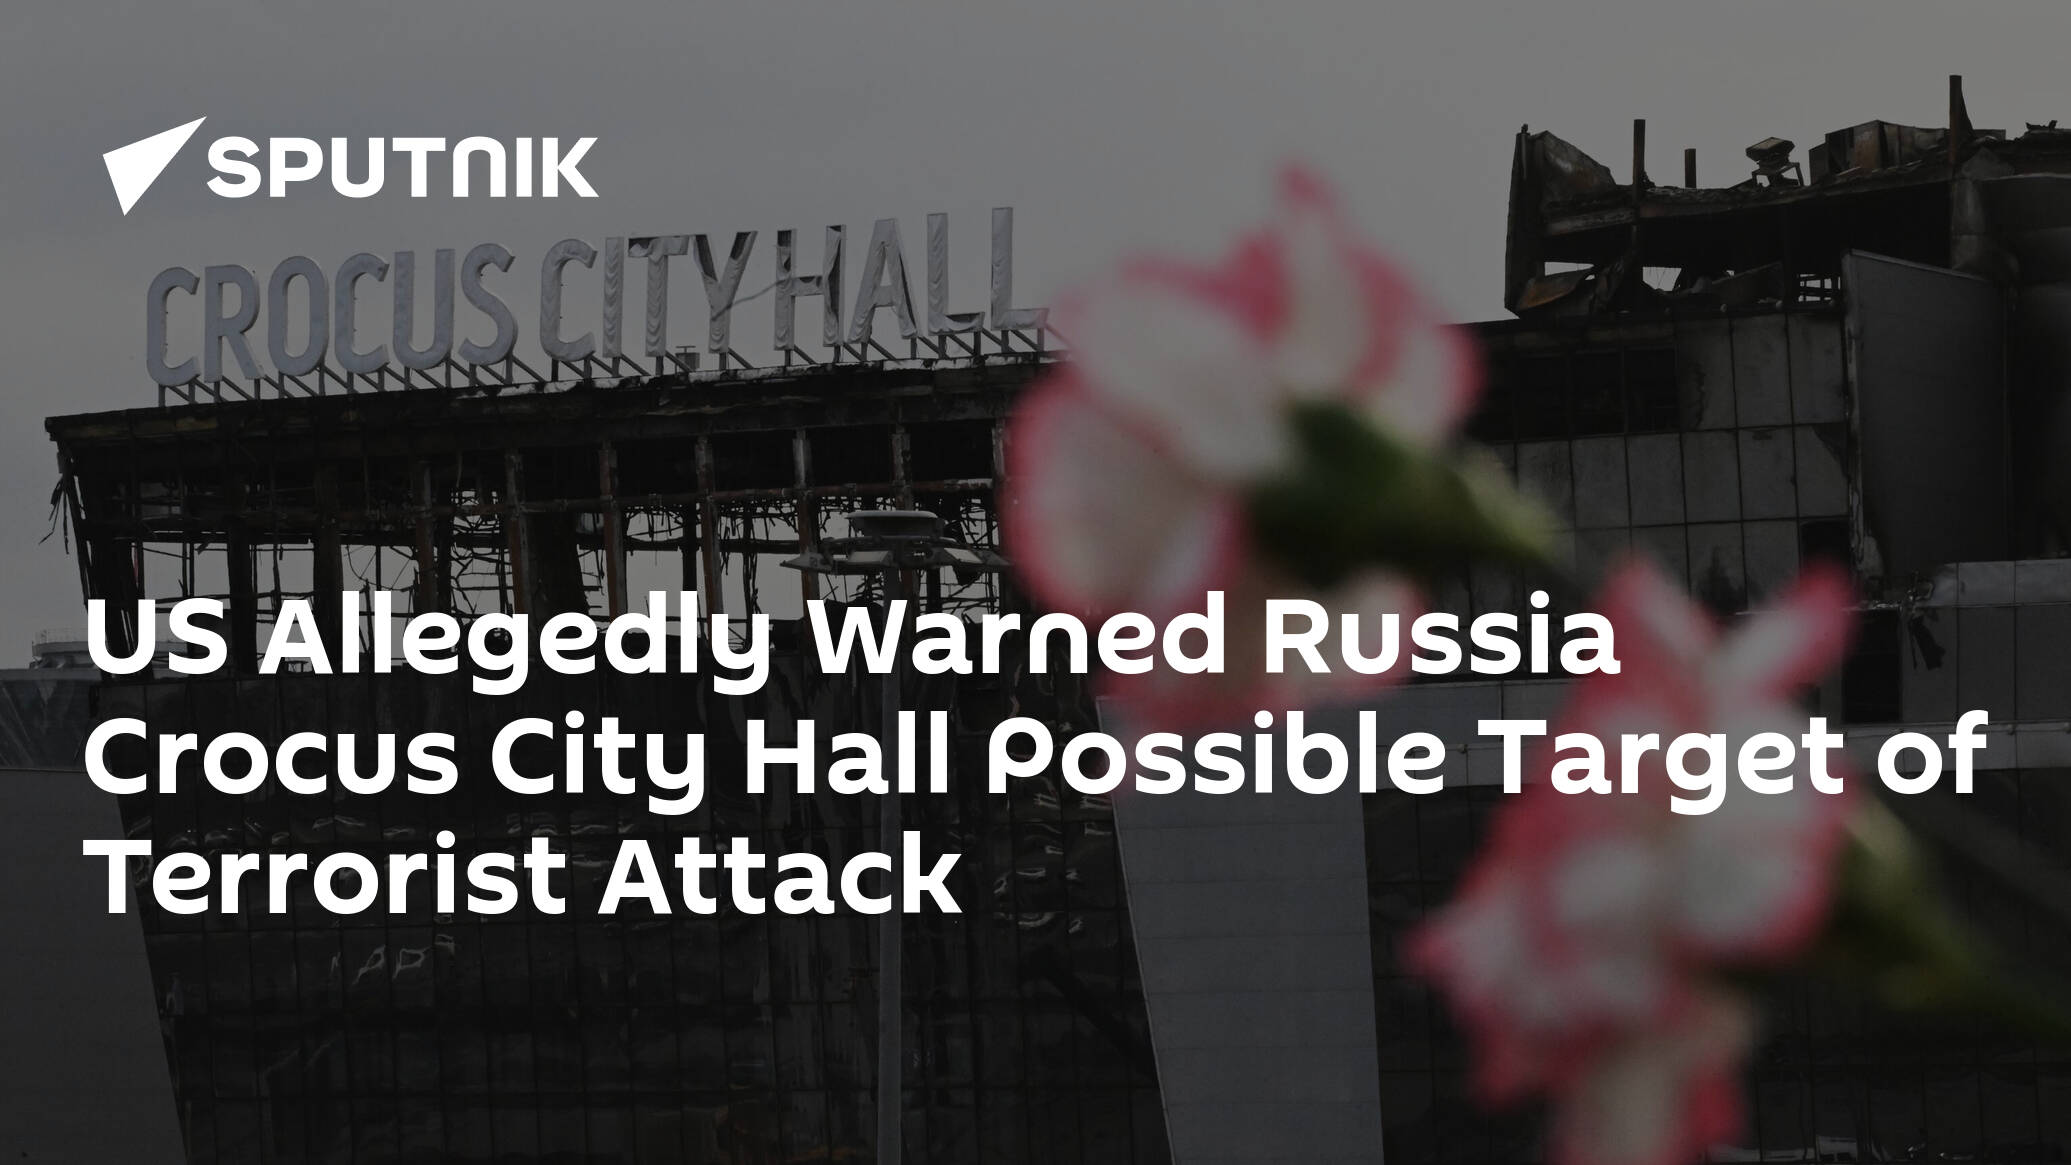 US Allegedly Warned Russia Crocus City Hall Possible Target of Terrorist Attack